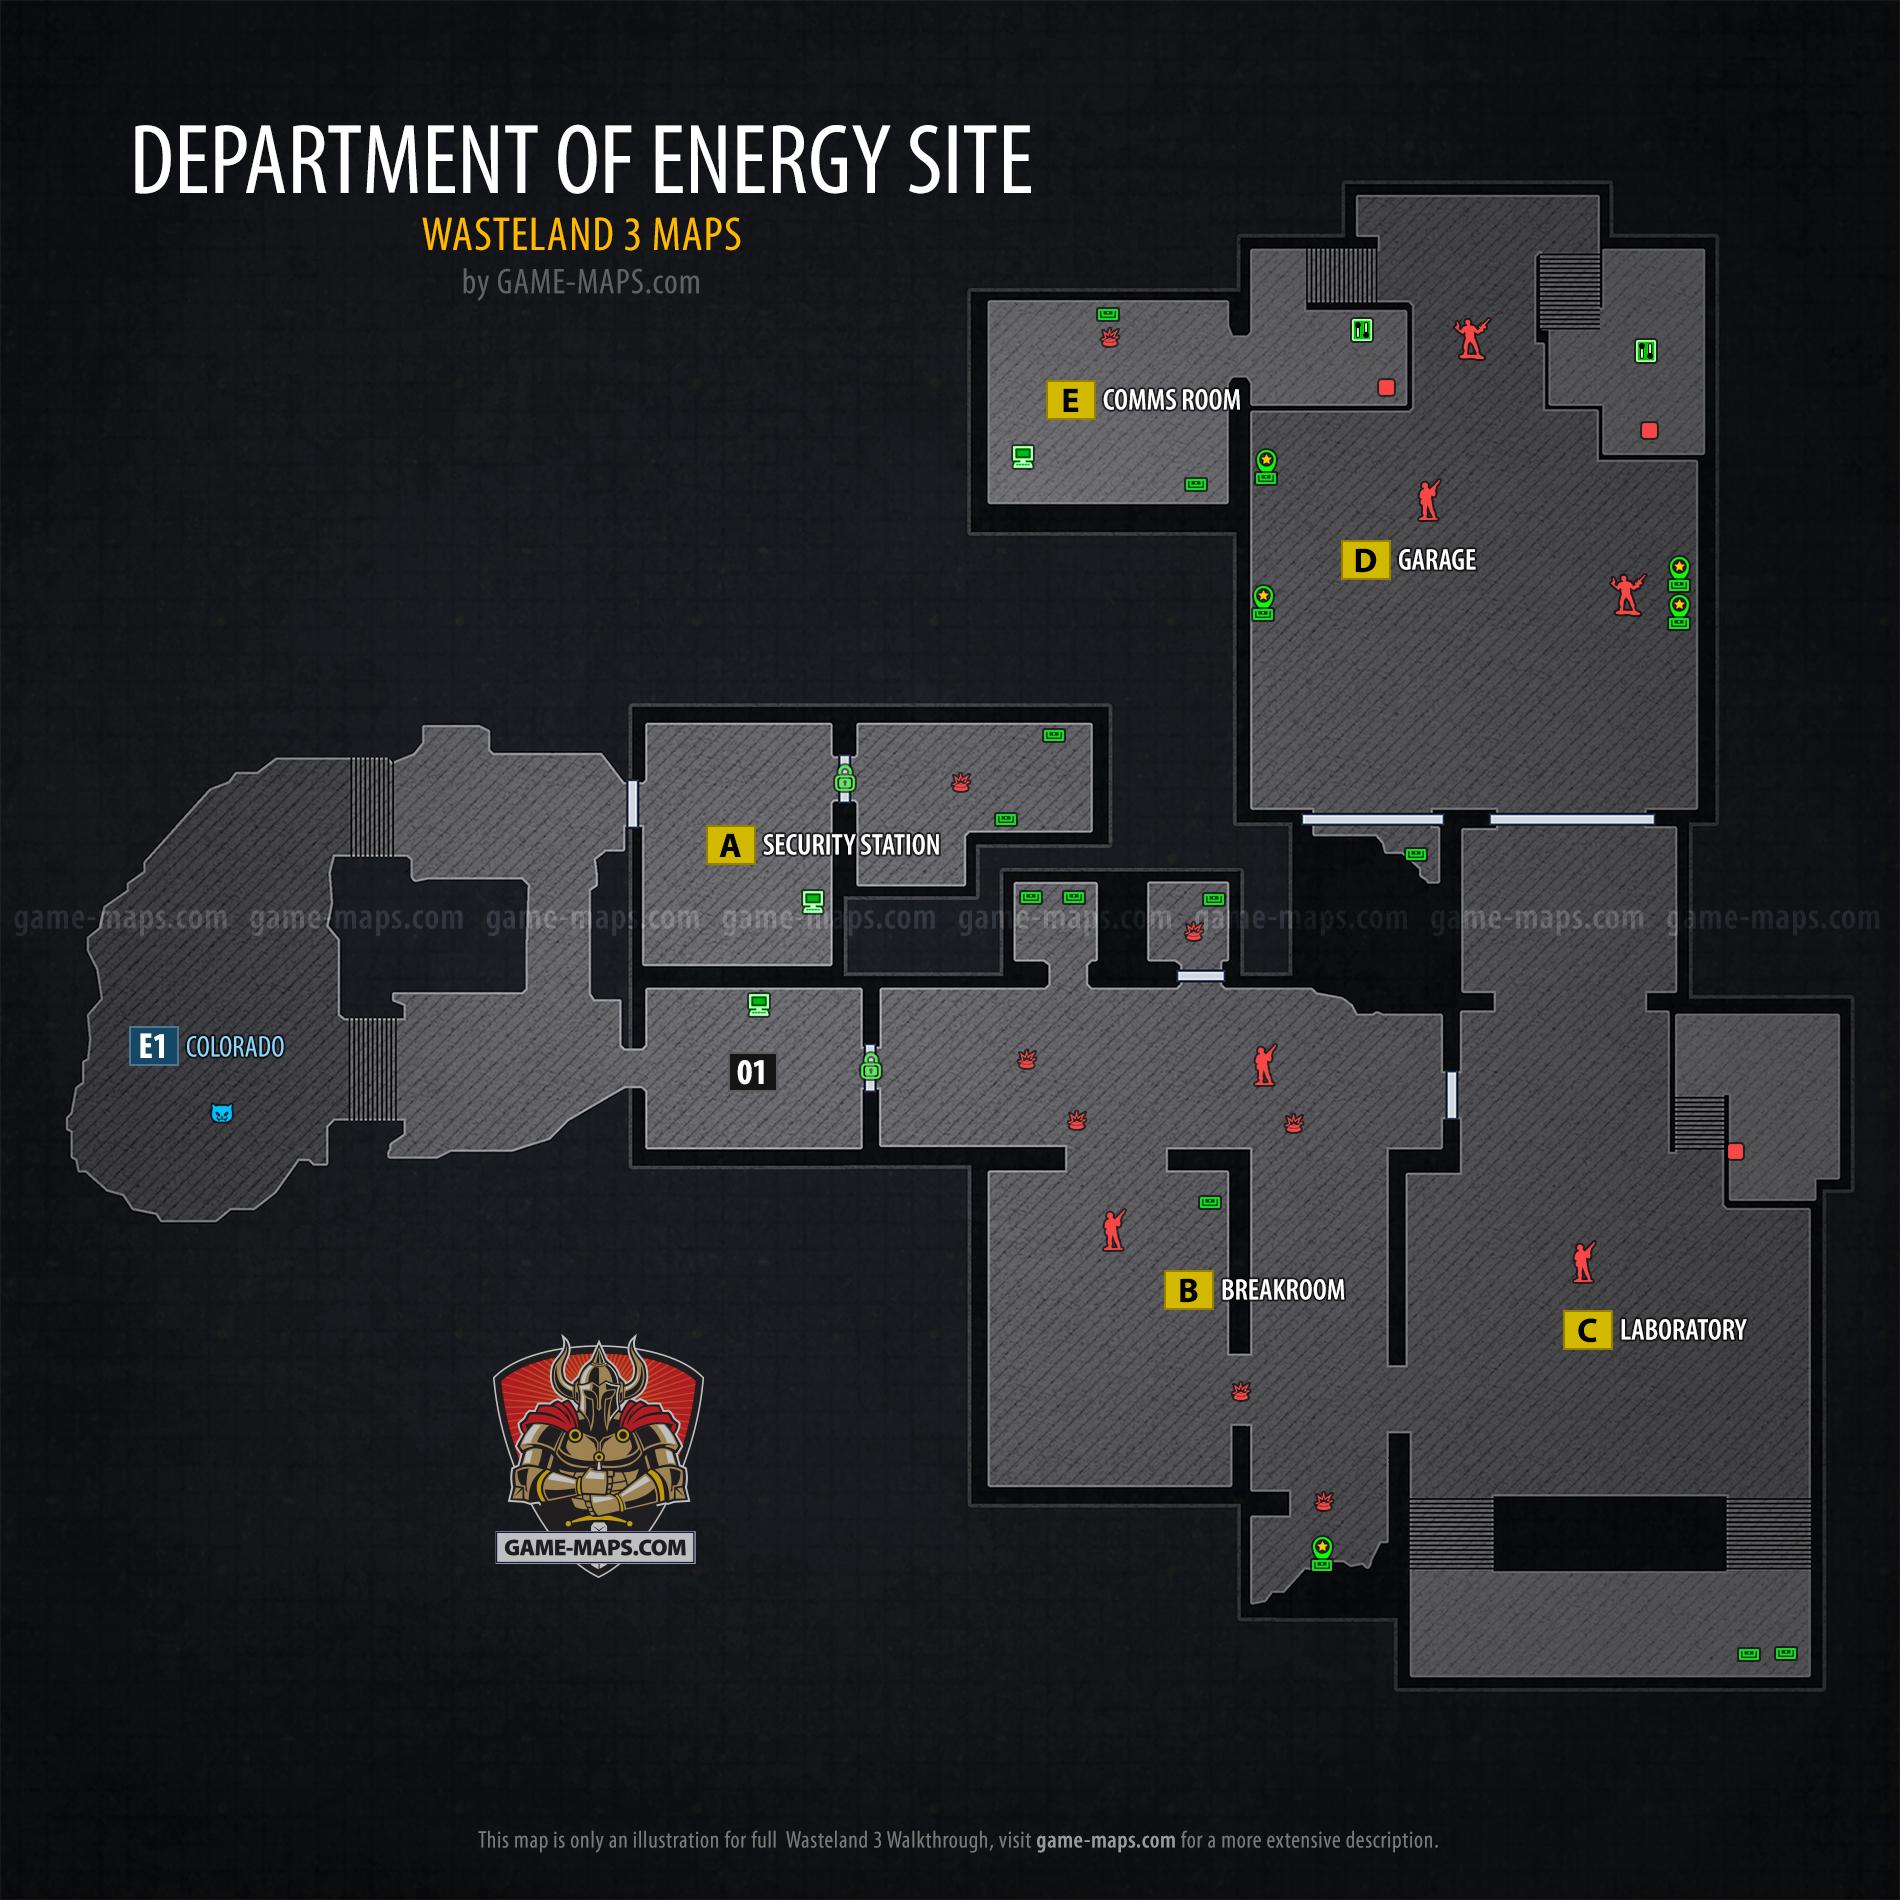 Department of Energy Site - Wasteland 3